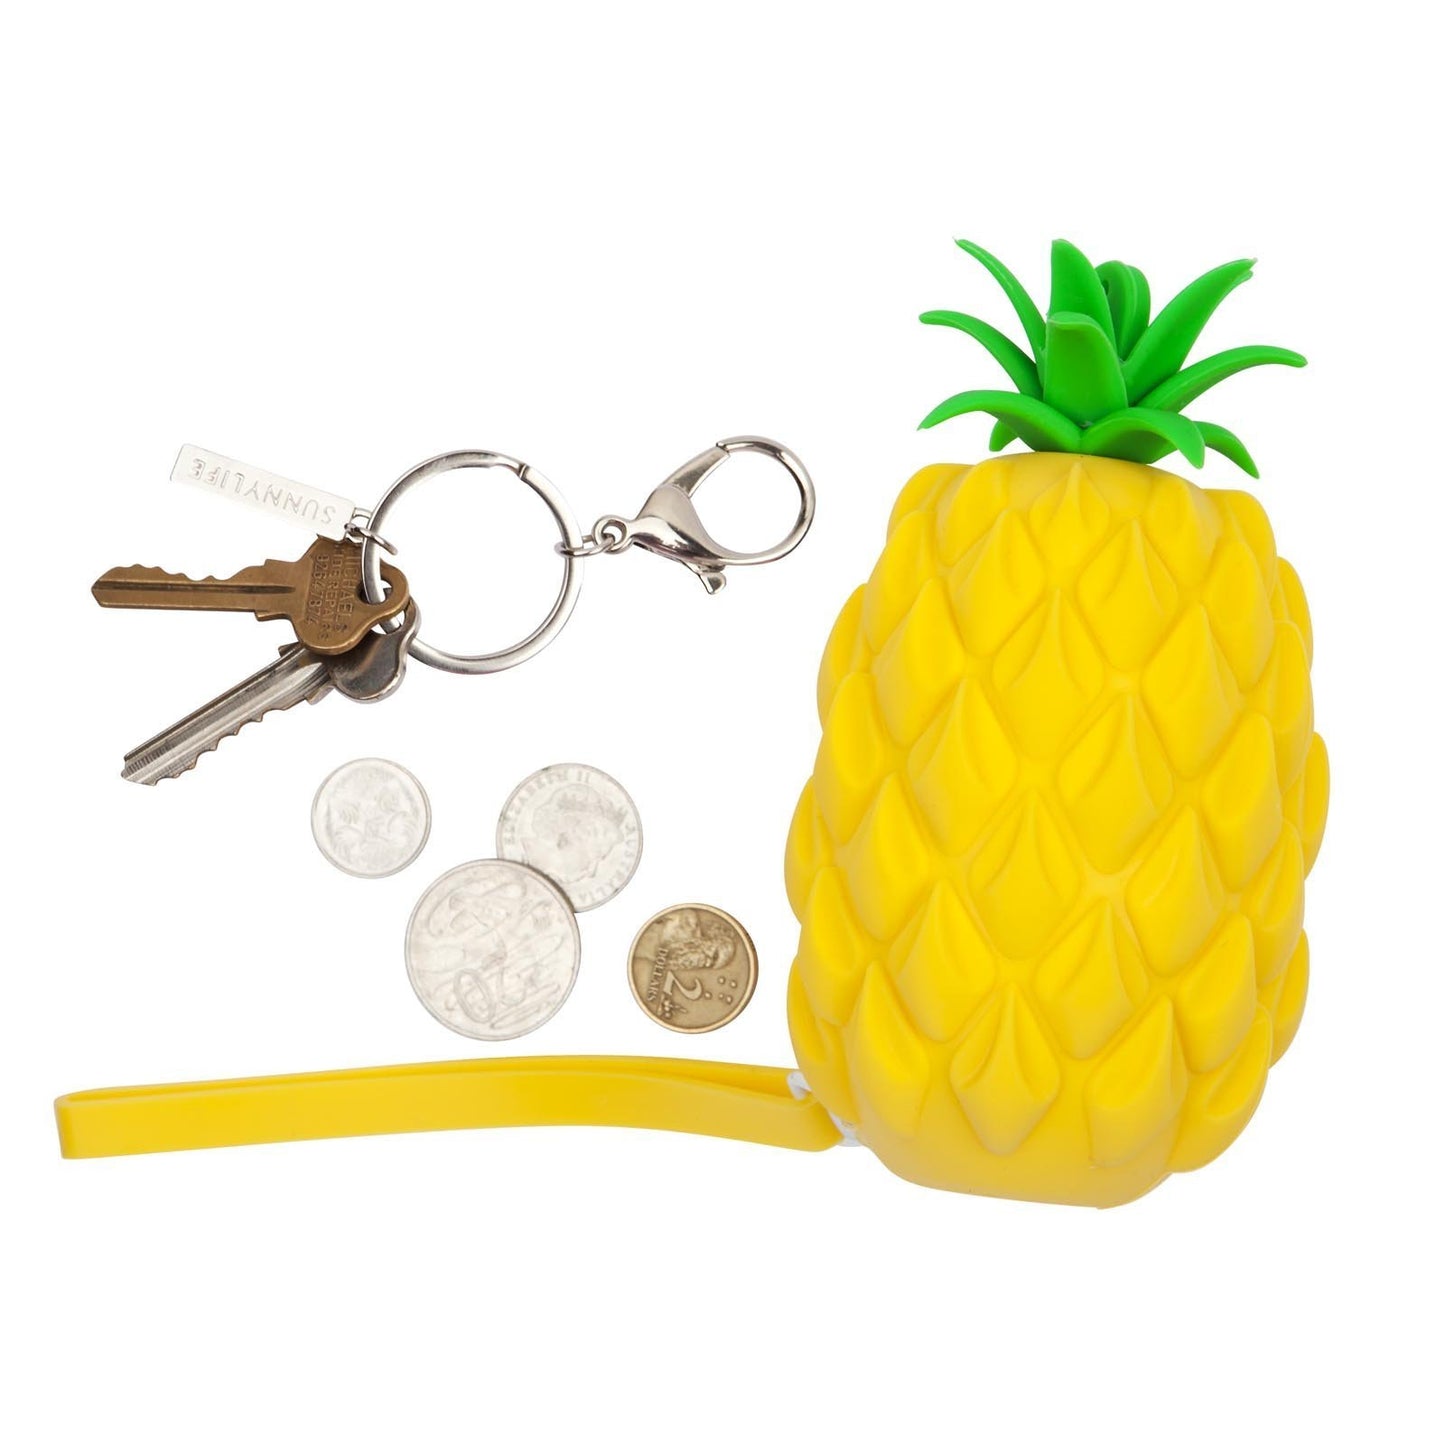 Sunnylife Pineapple silicone coin purse